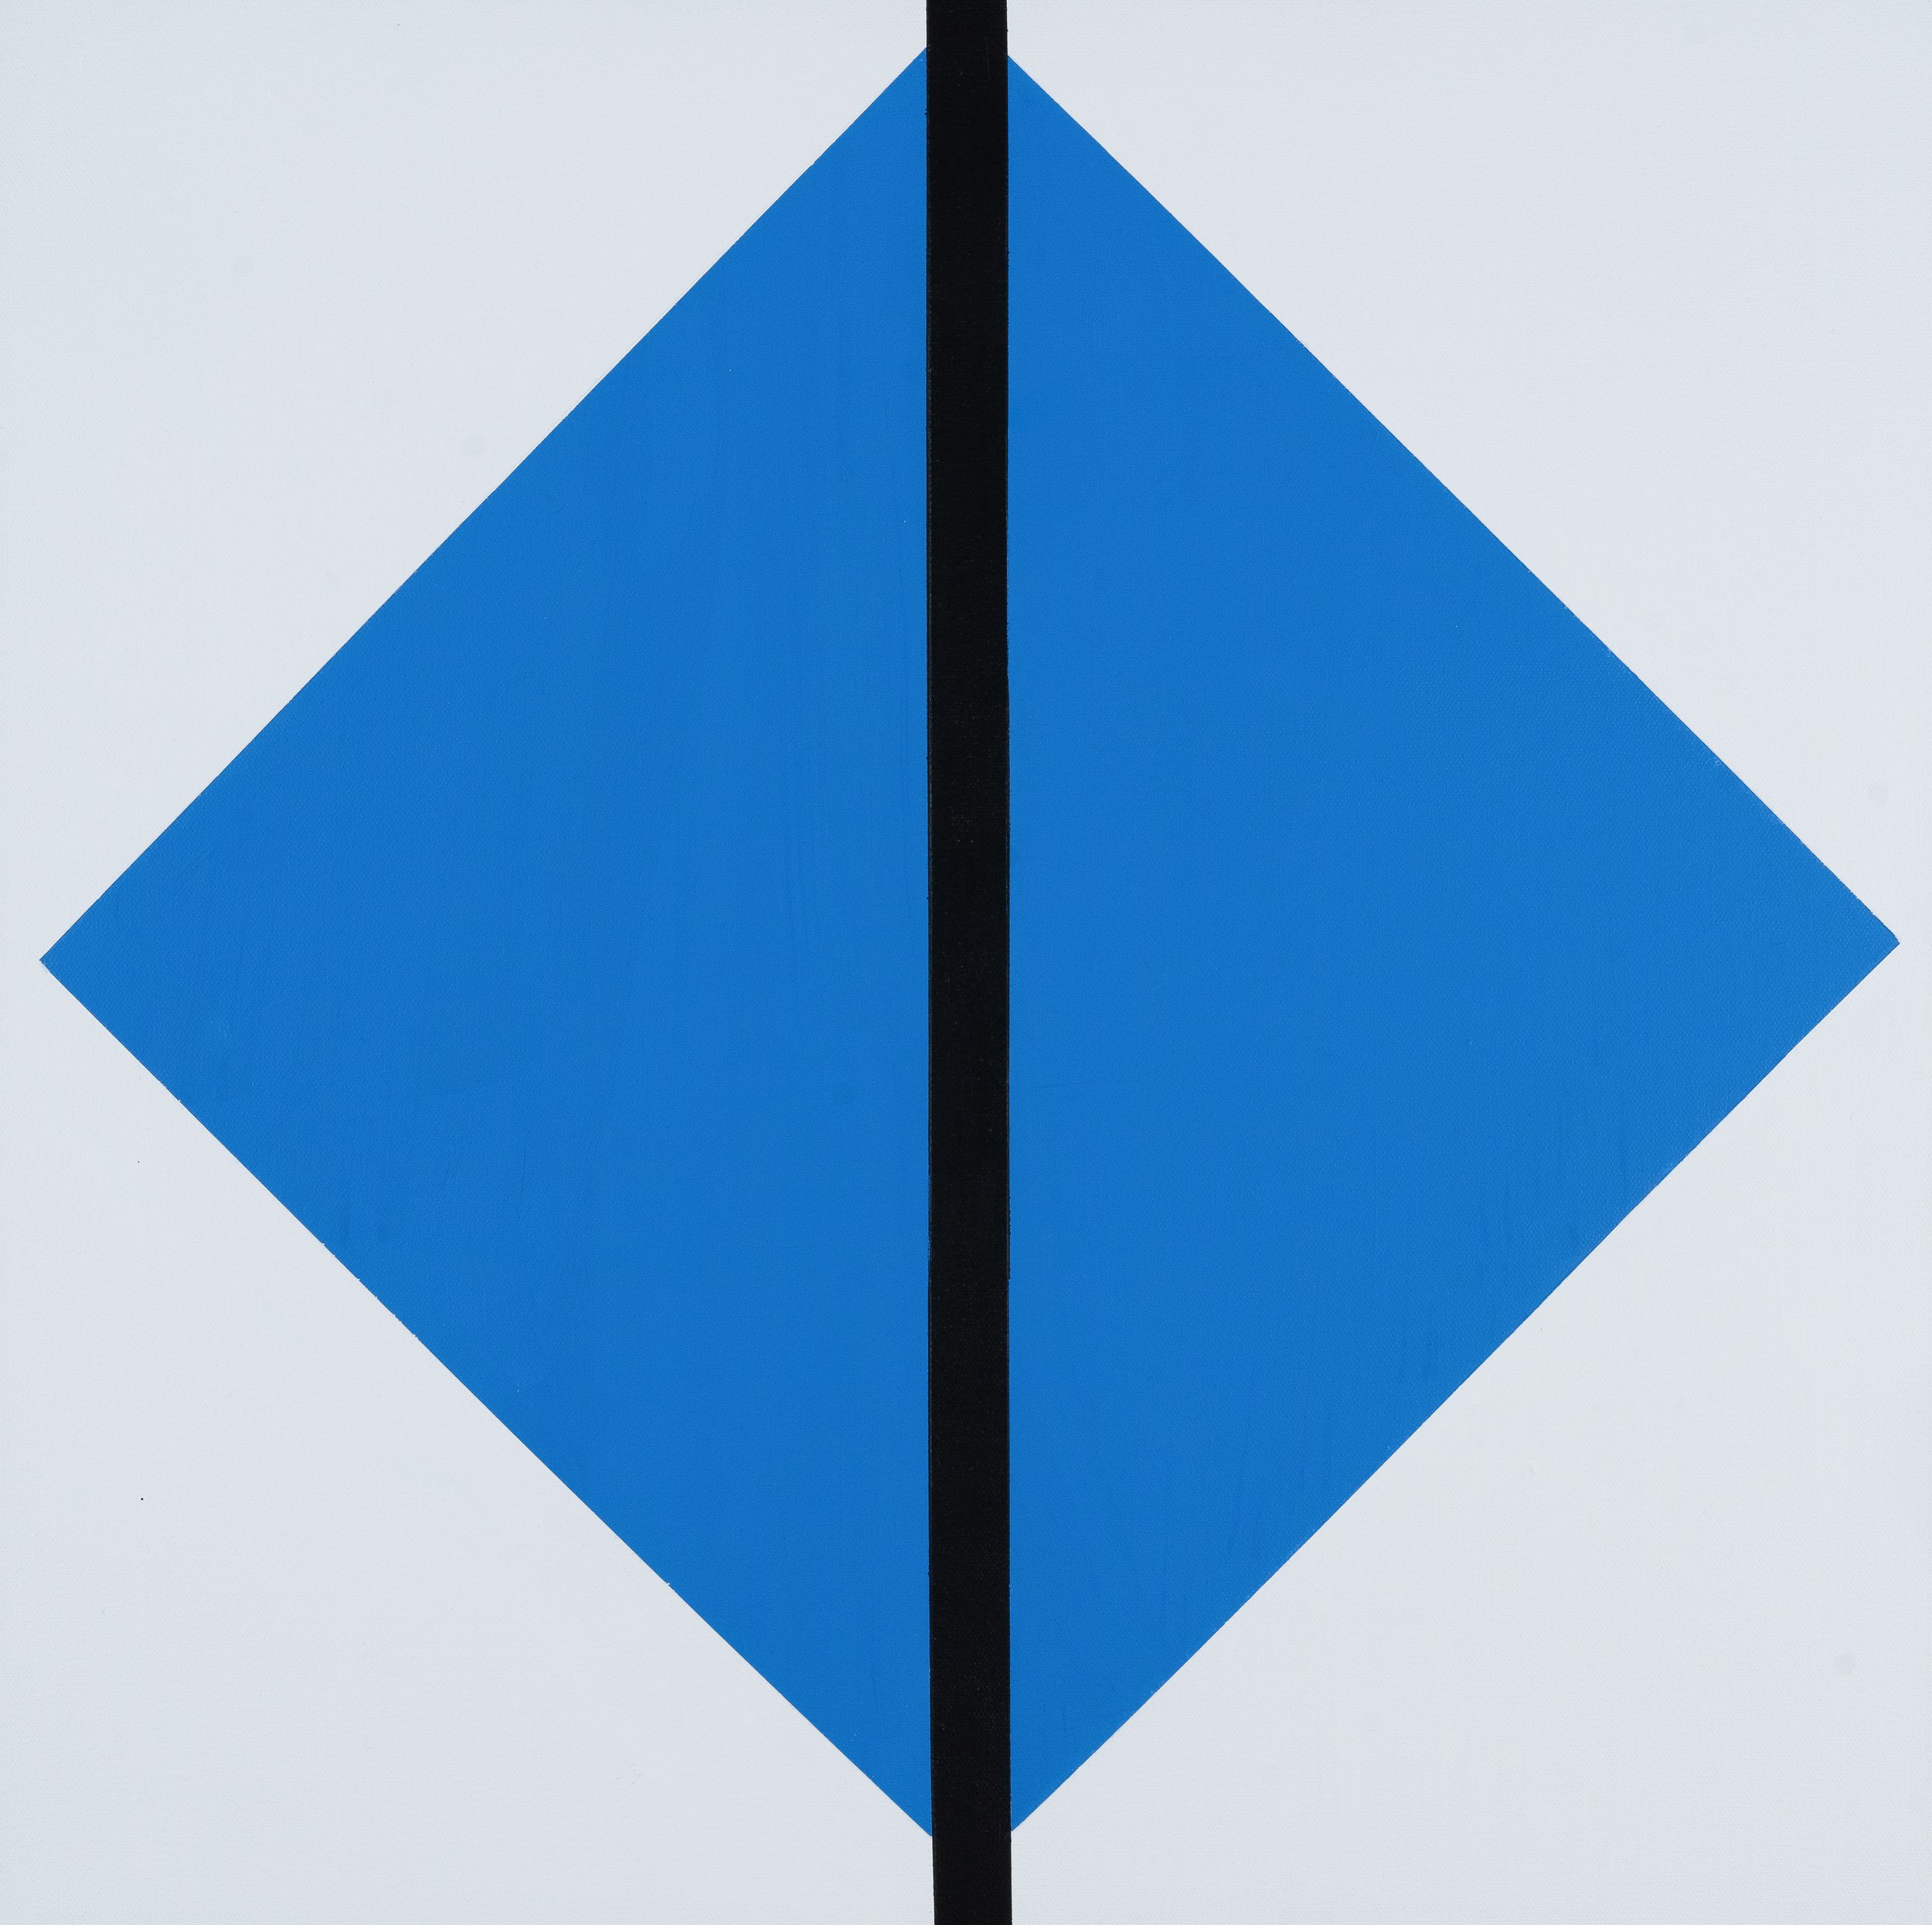 Blue and White Divided Square, 2022, acrylic on canvas, 24x24 inches